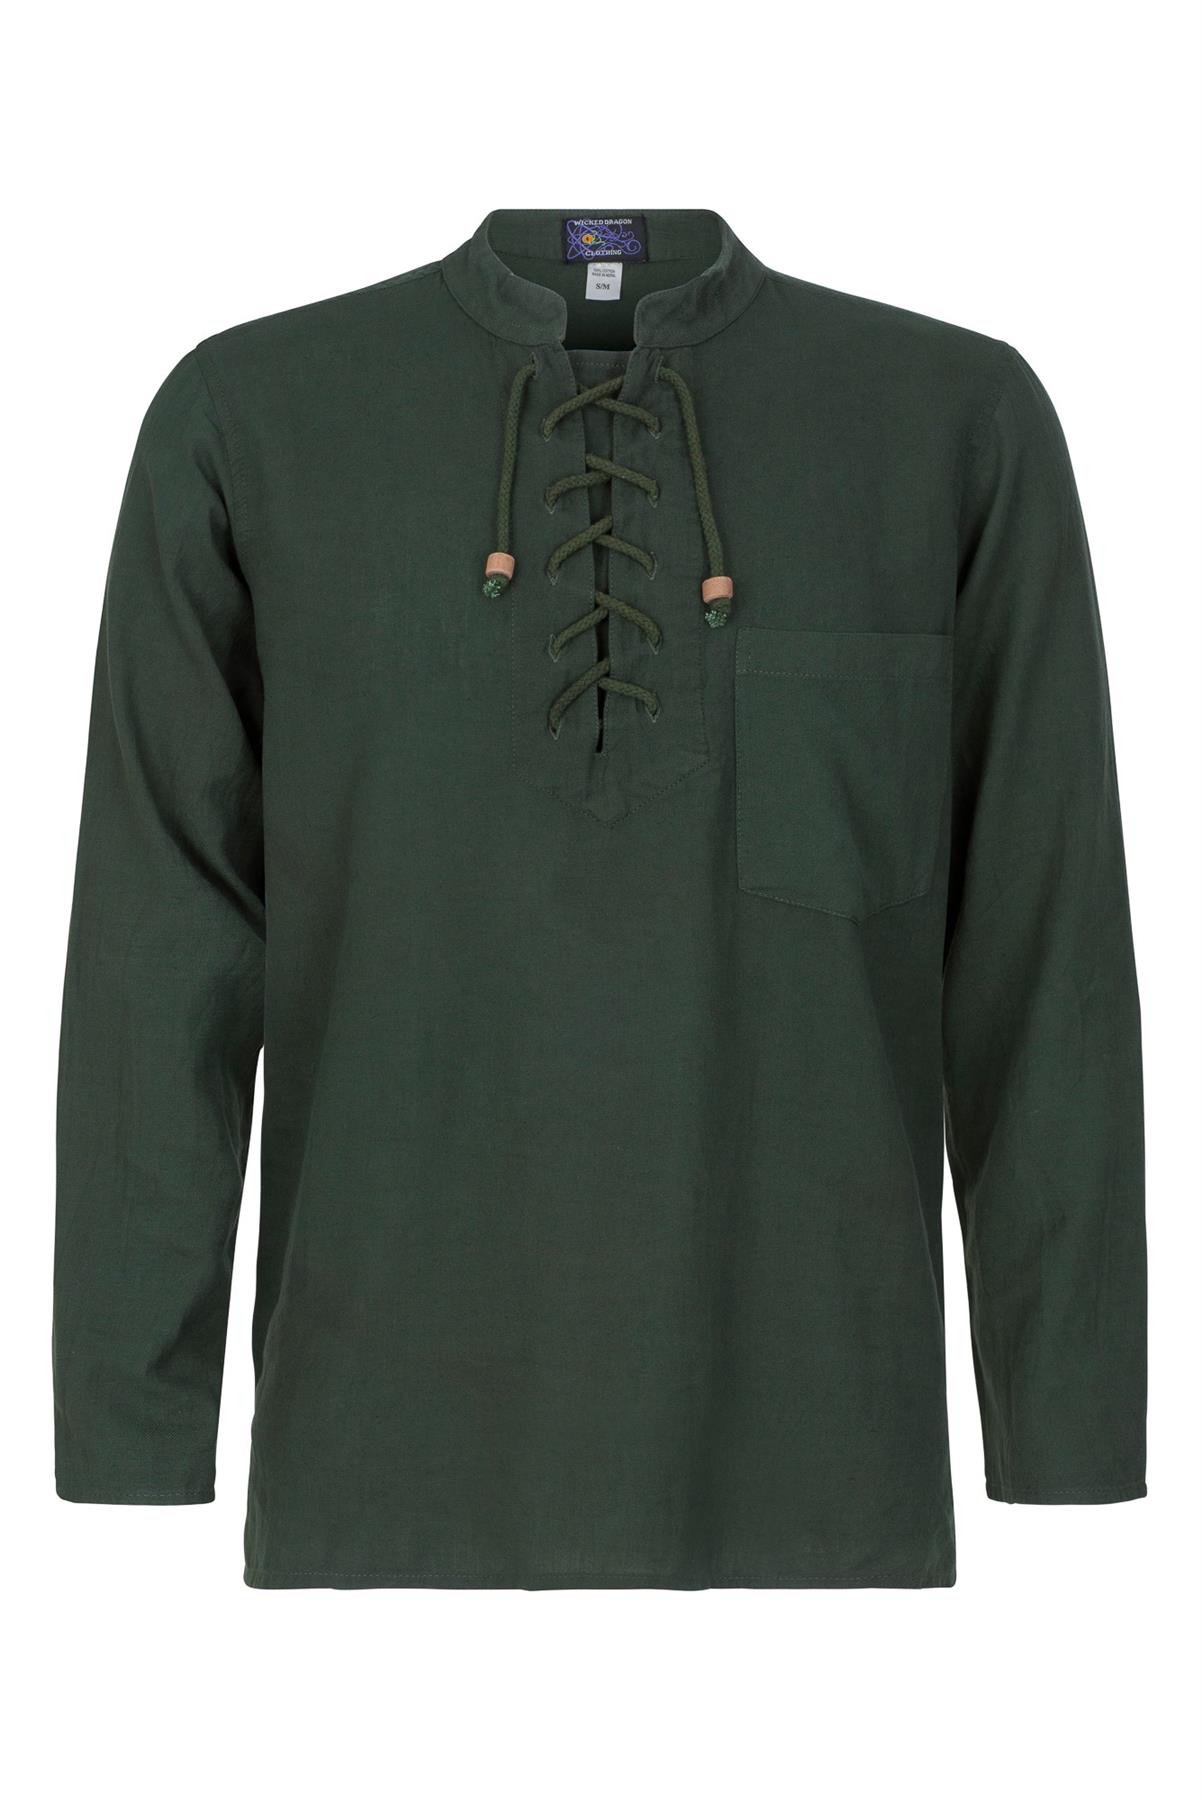 Long sleeve medieval style shirt